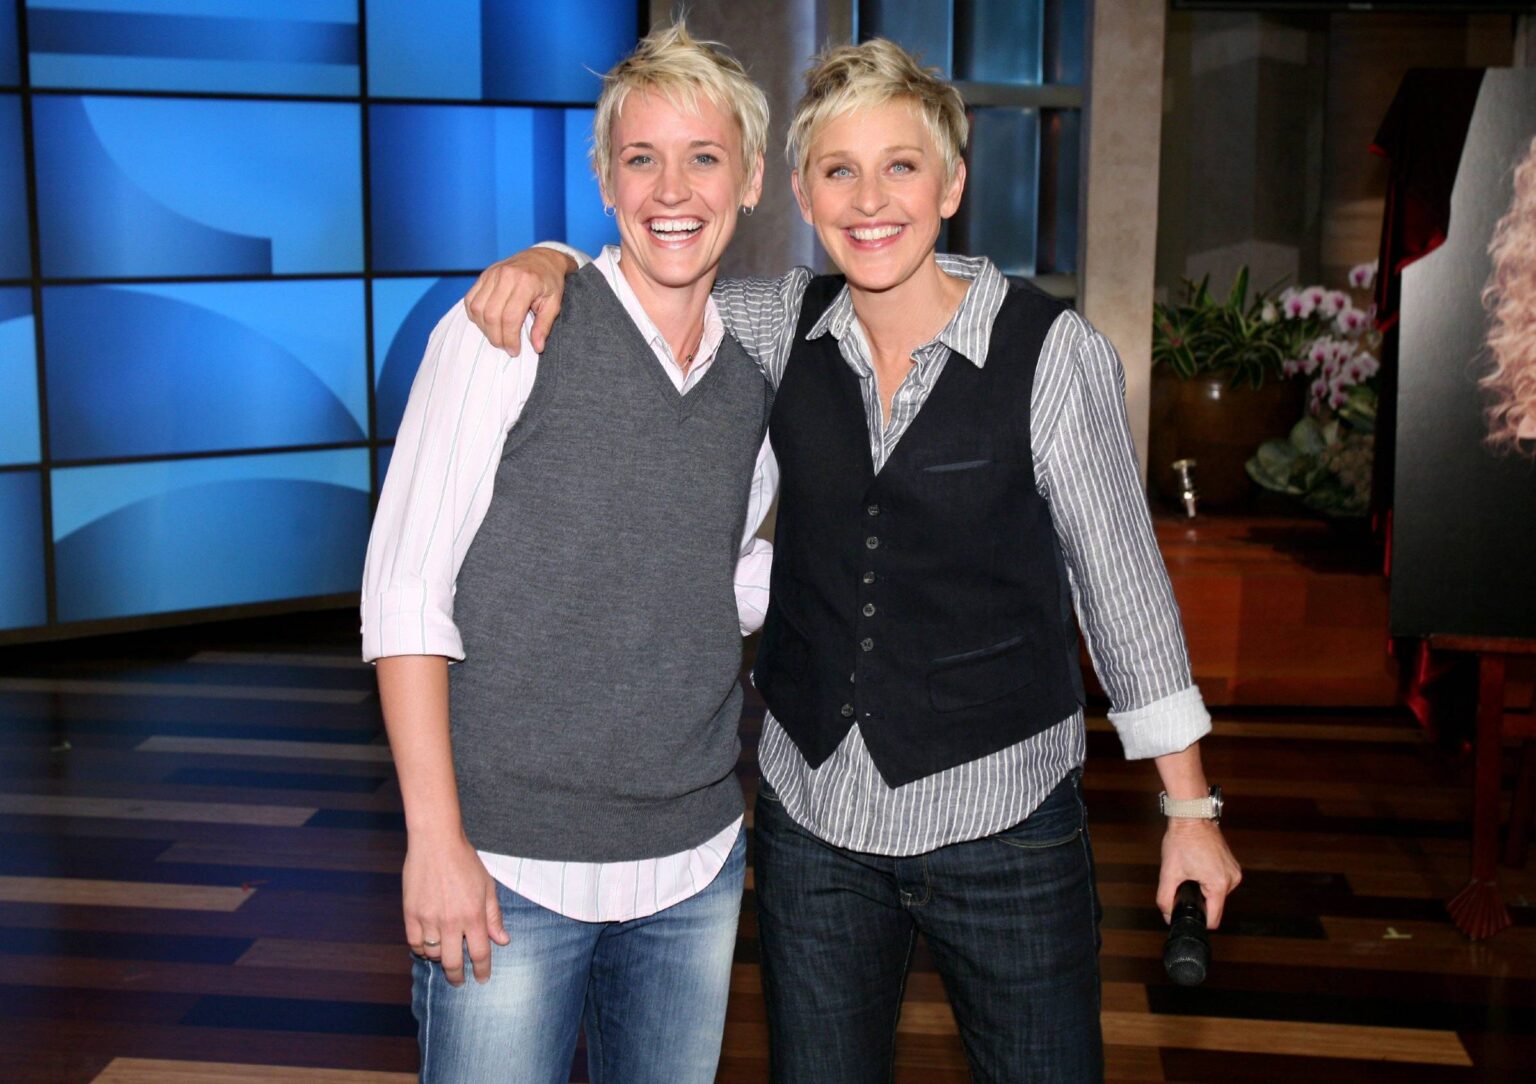 An Ellen DeGeneres lookalike needed therapy after the Queen of Mean unexpectedly used an audition reel on her talk show.